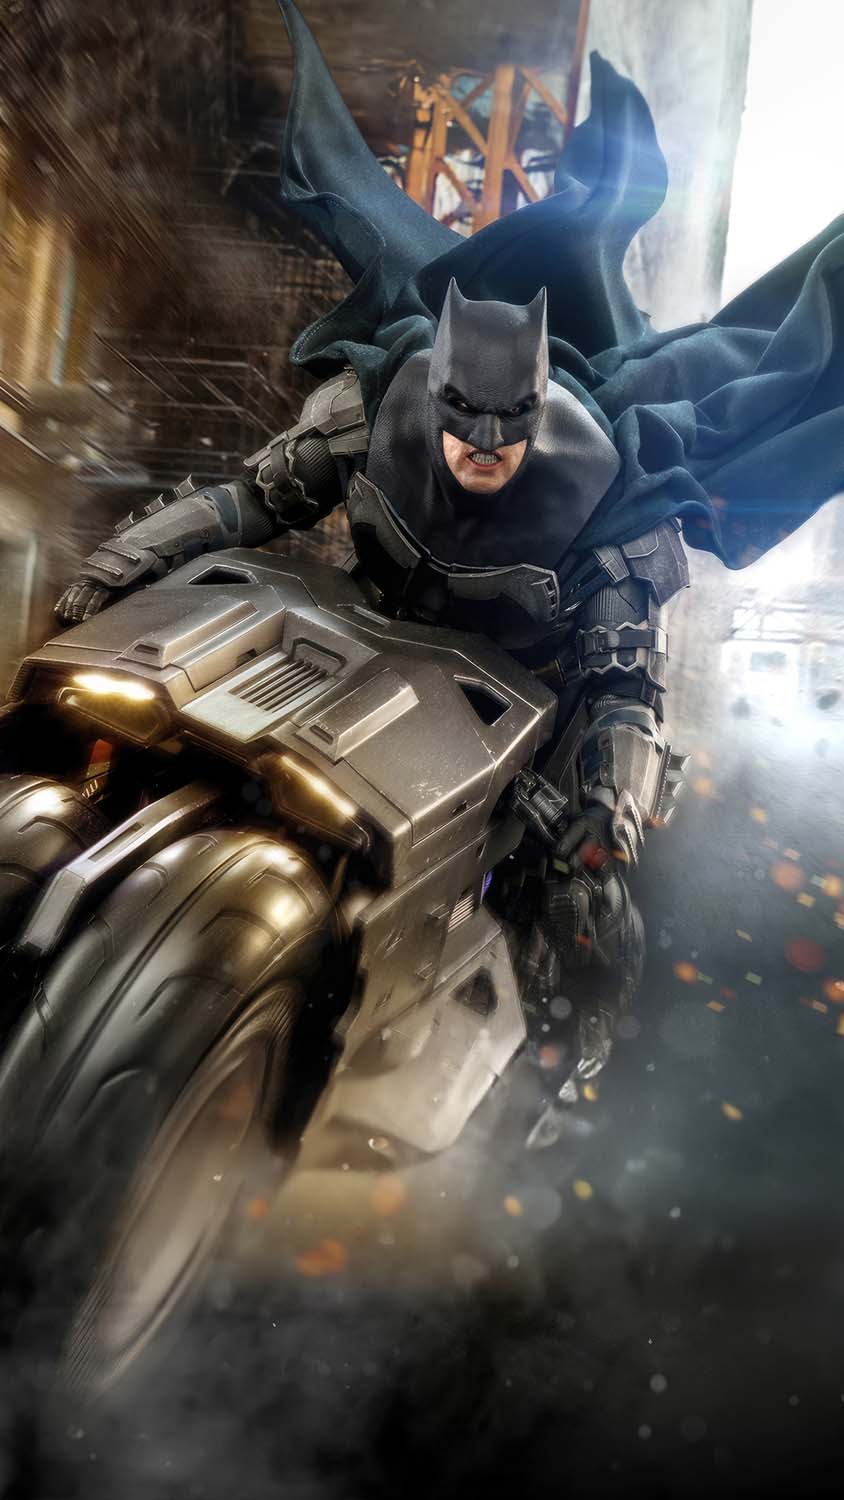 Batcycle in the Flash Movie iPhone Wallpaper HD